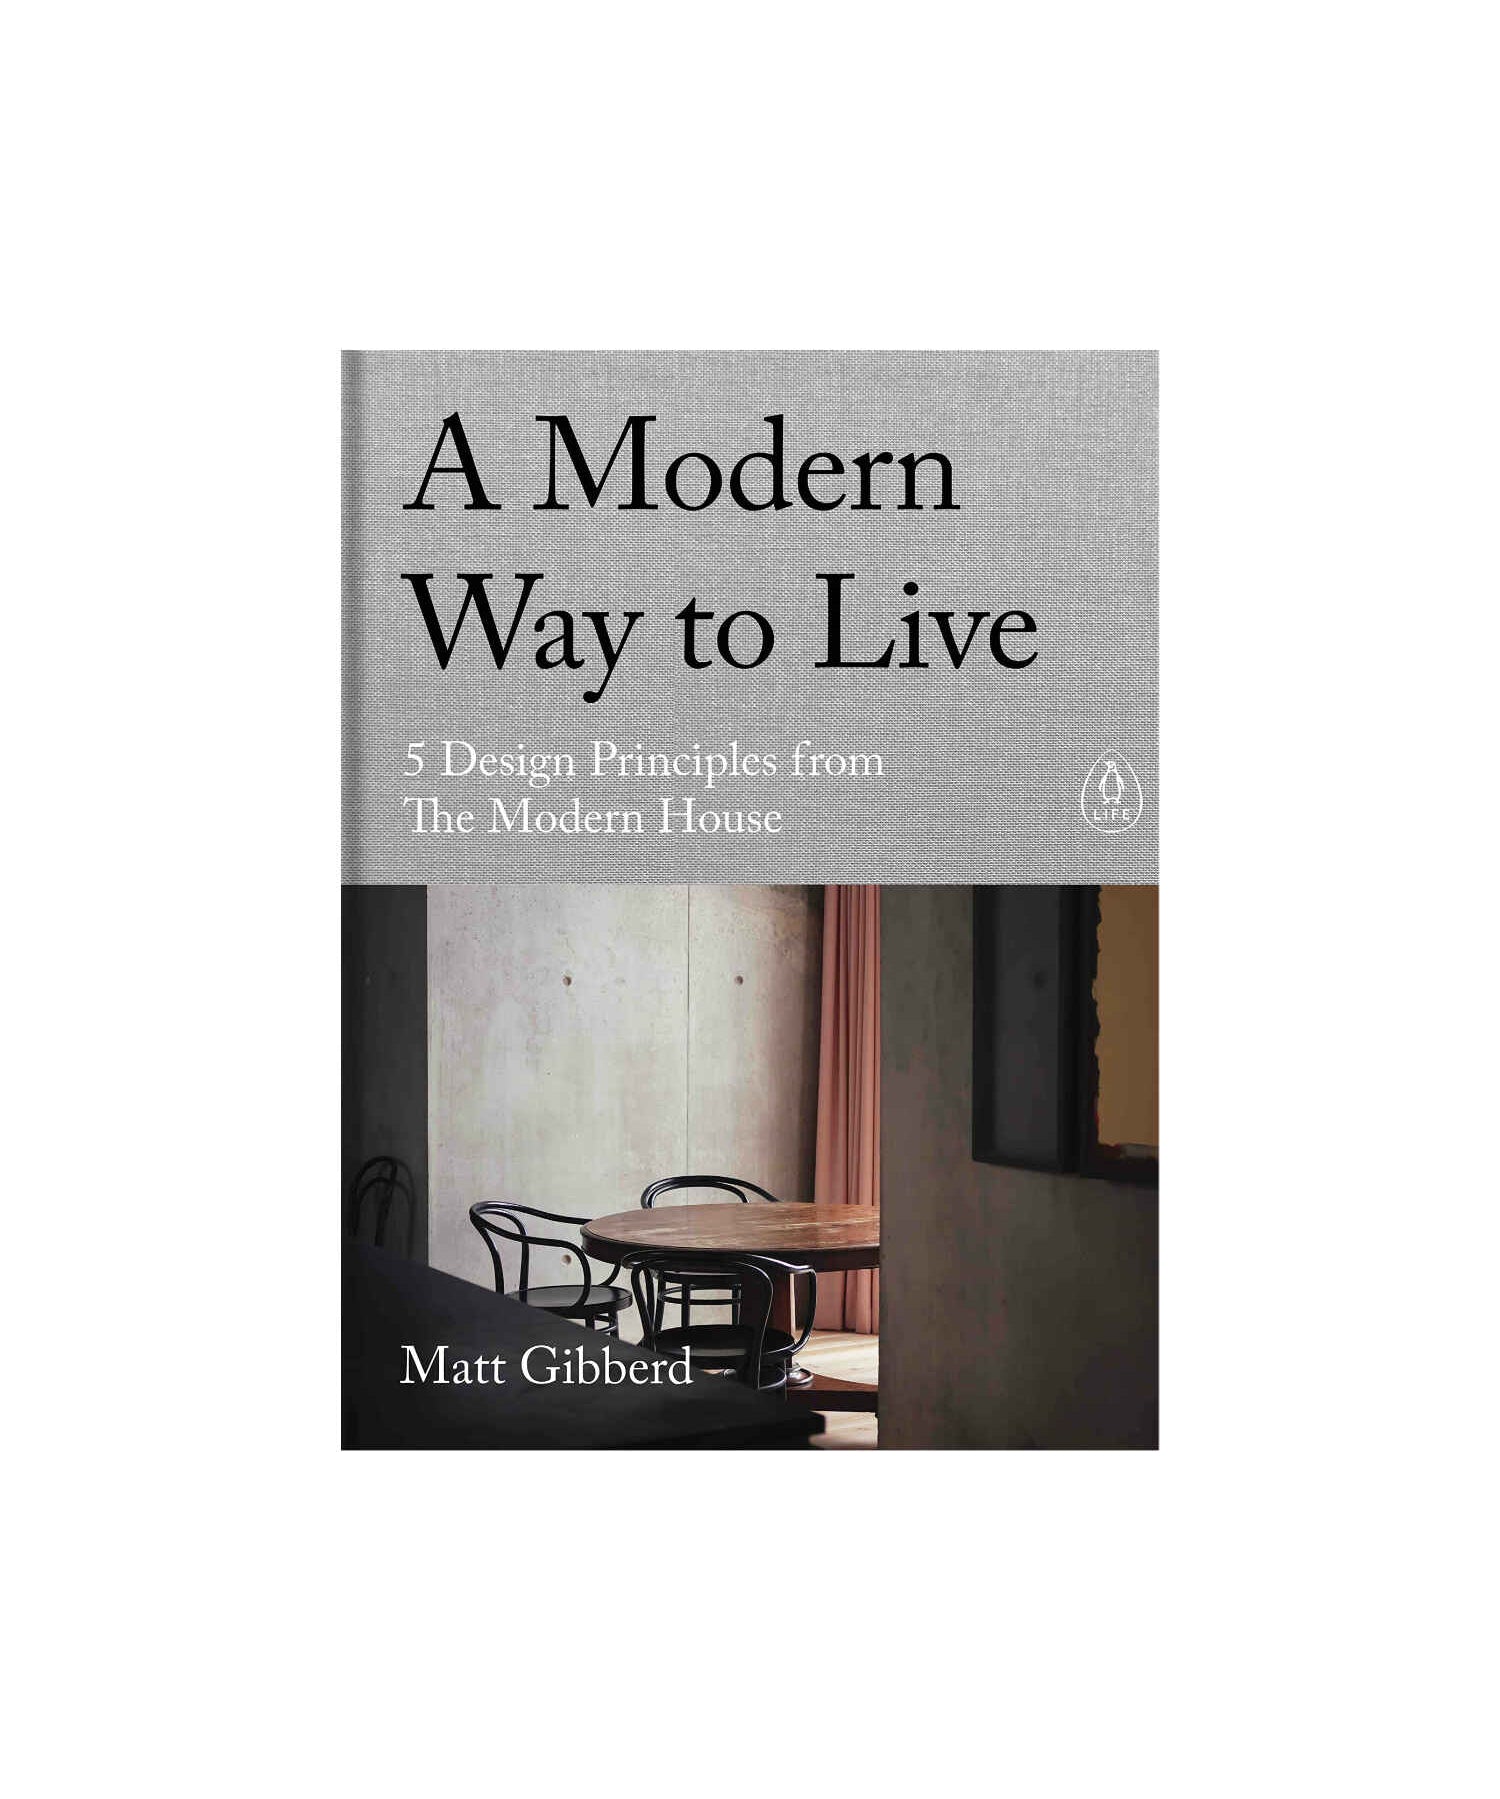 Coffee table book - A Modern Way to Live